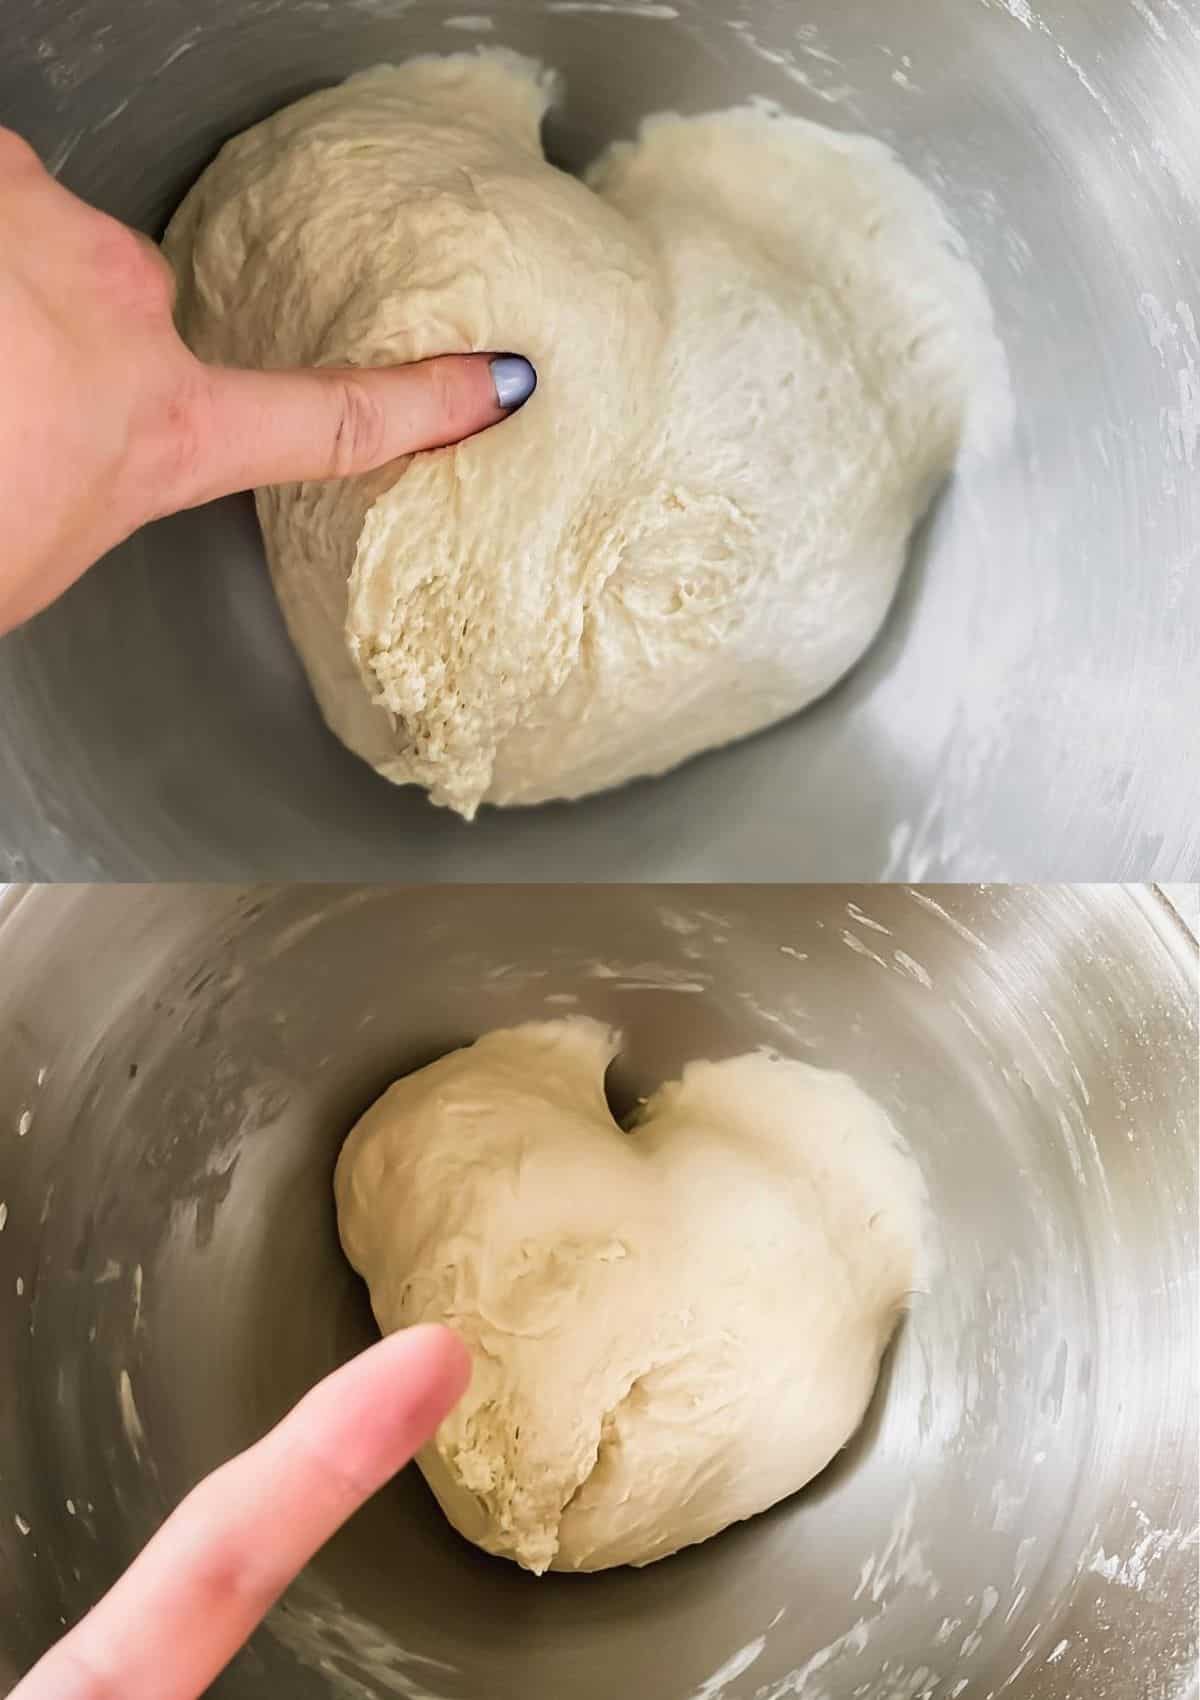 sticking a finger in pizza dough to make sure the dough doesn't stick